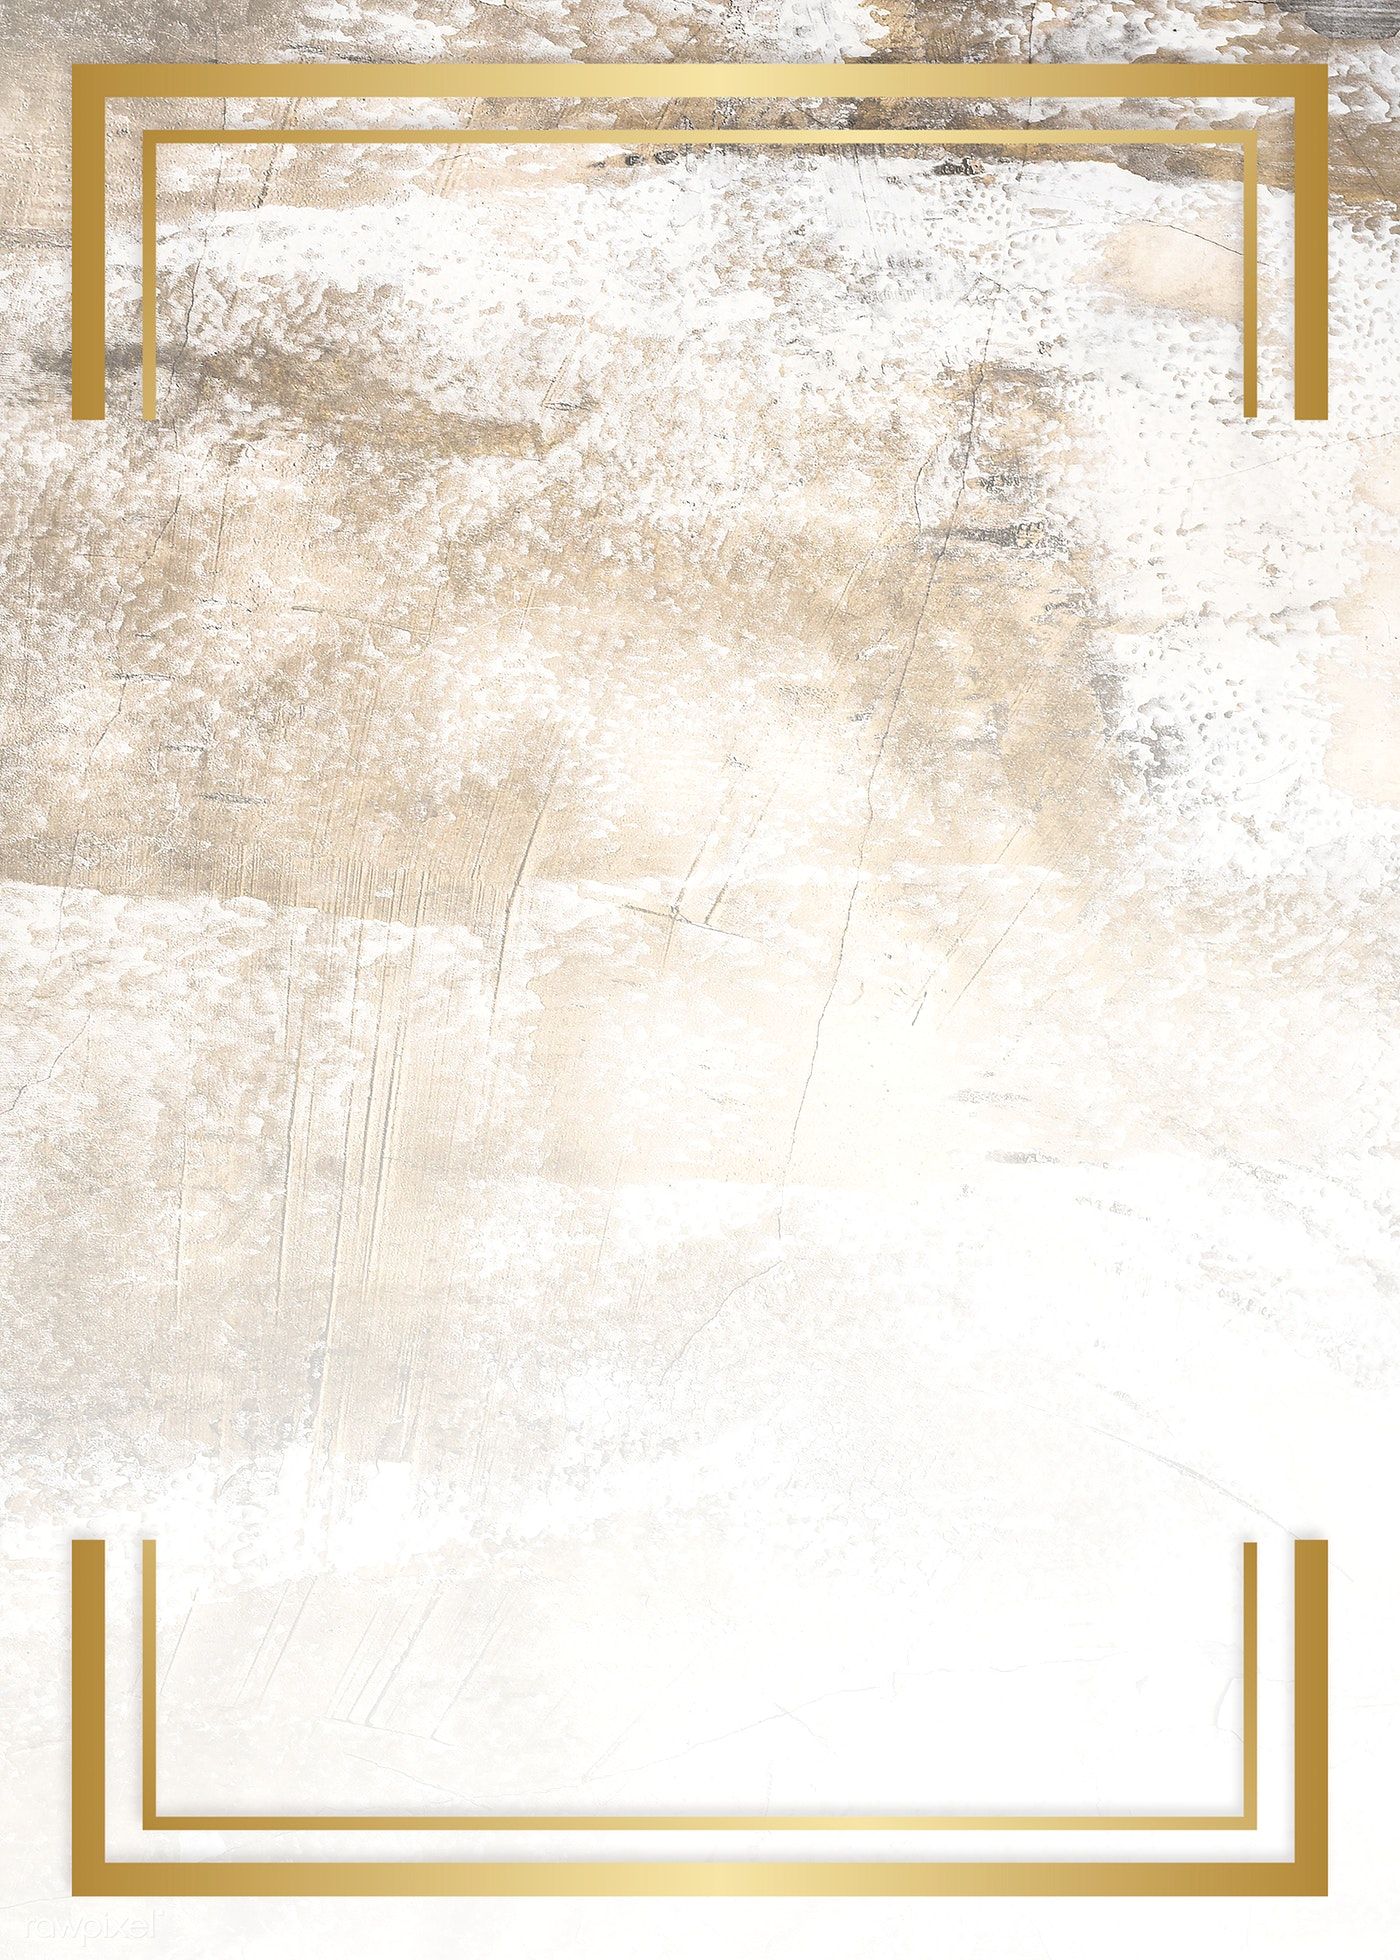 Download premium image of Golden framed badge on a marble texture